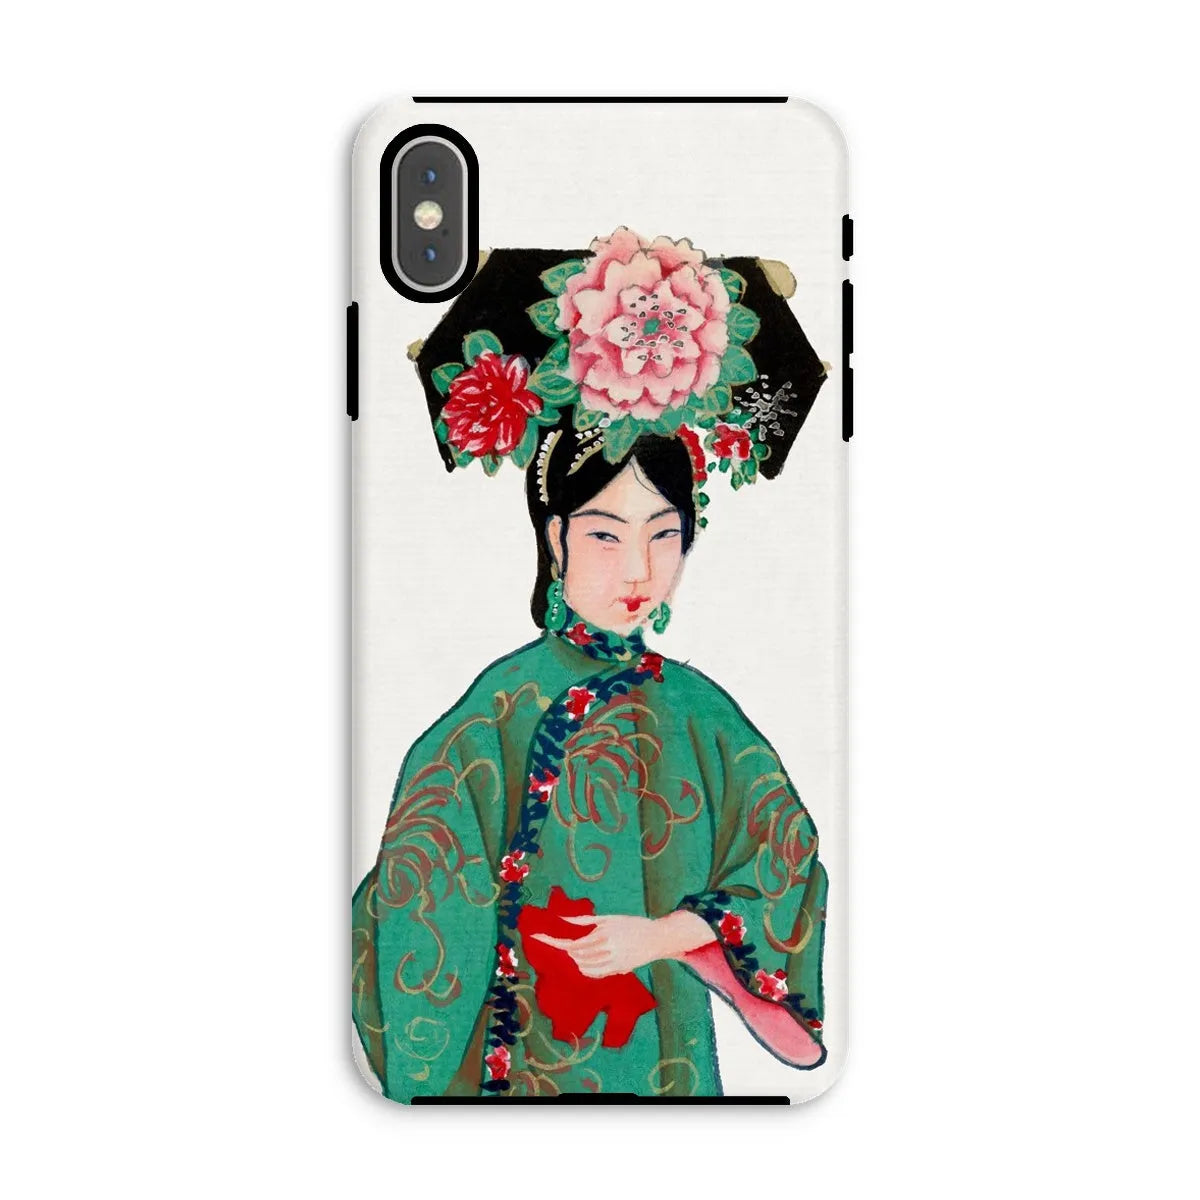 Chinese Noblewoman In Manchu Couture Art Phone Case - Iphone Xs Max / Matte - Mobile Phone Cases - Aesthetic Art